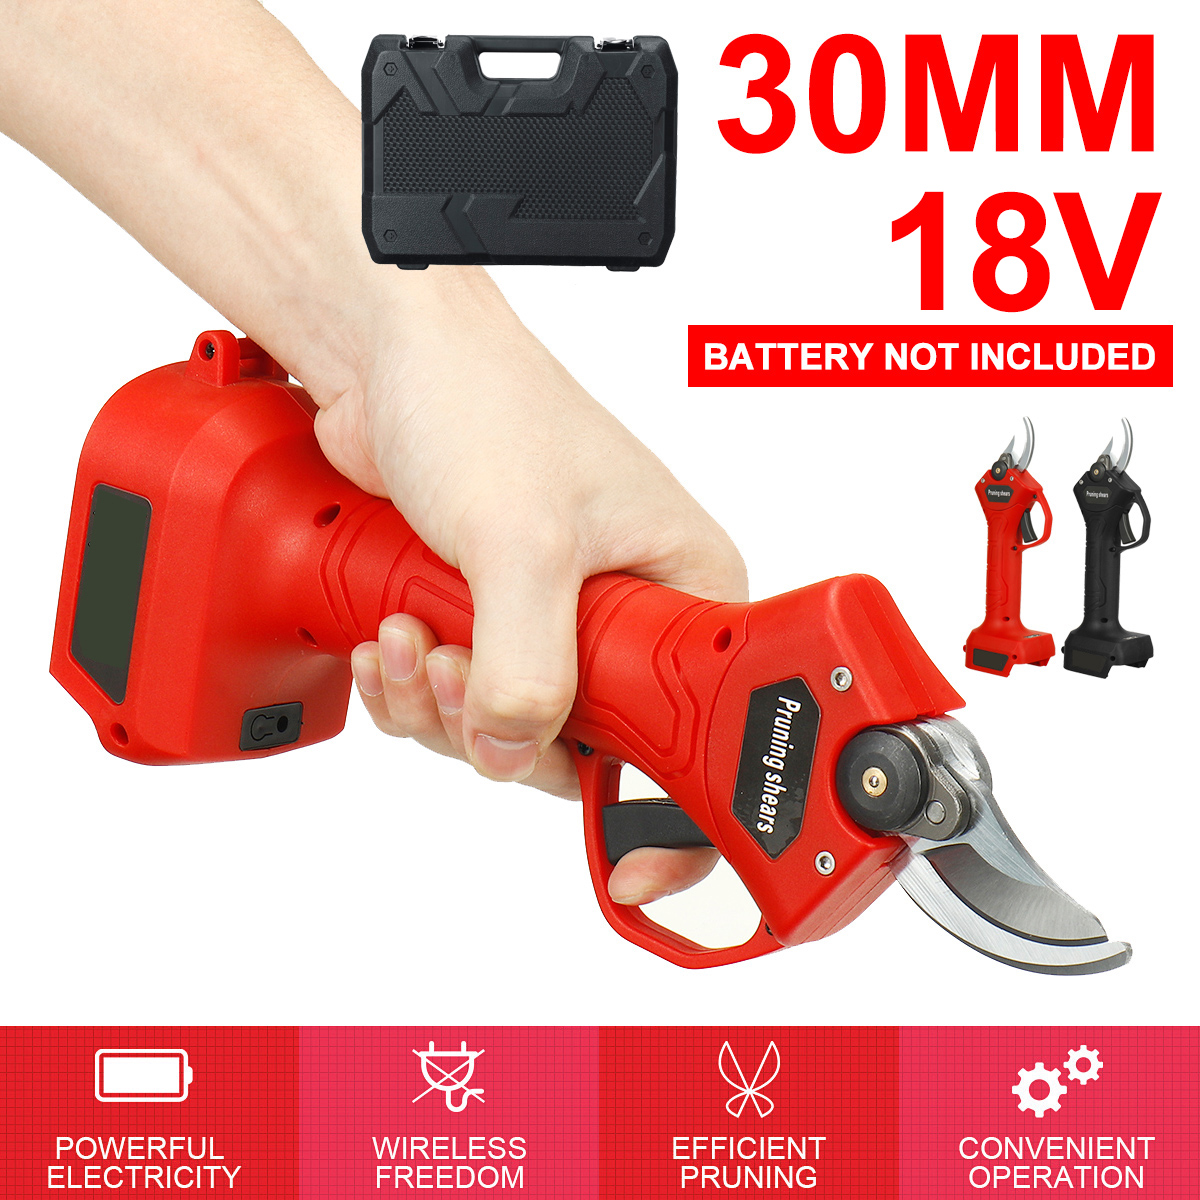 30mm-Cordless-Electric-Pruning-Shears-Liion-Battery-Leaves-Trimmer-Garden-Power-Tool-Fit-Makita-1885465-3